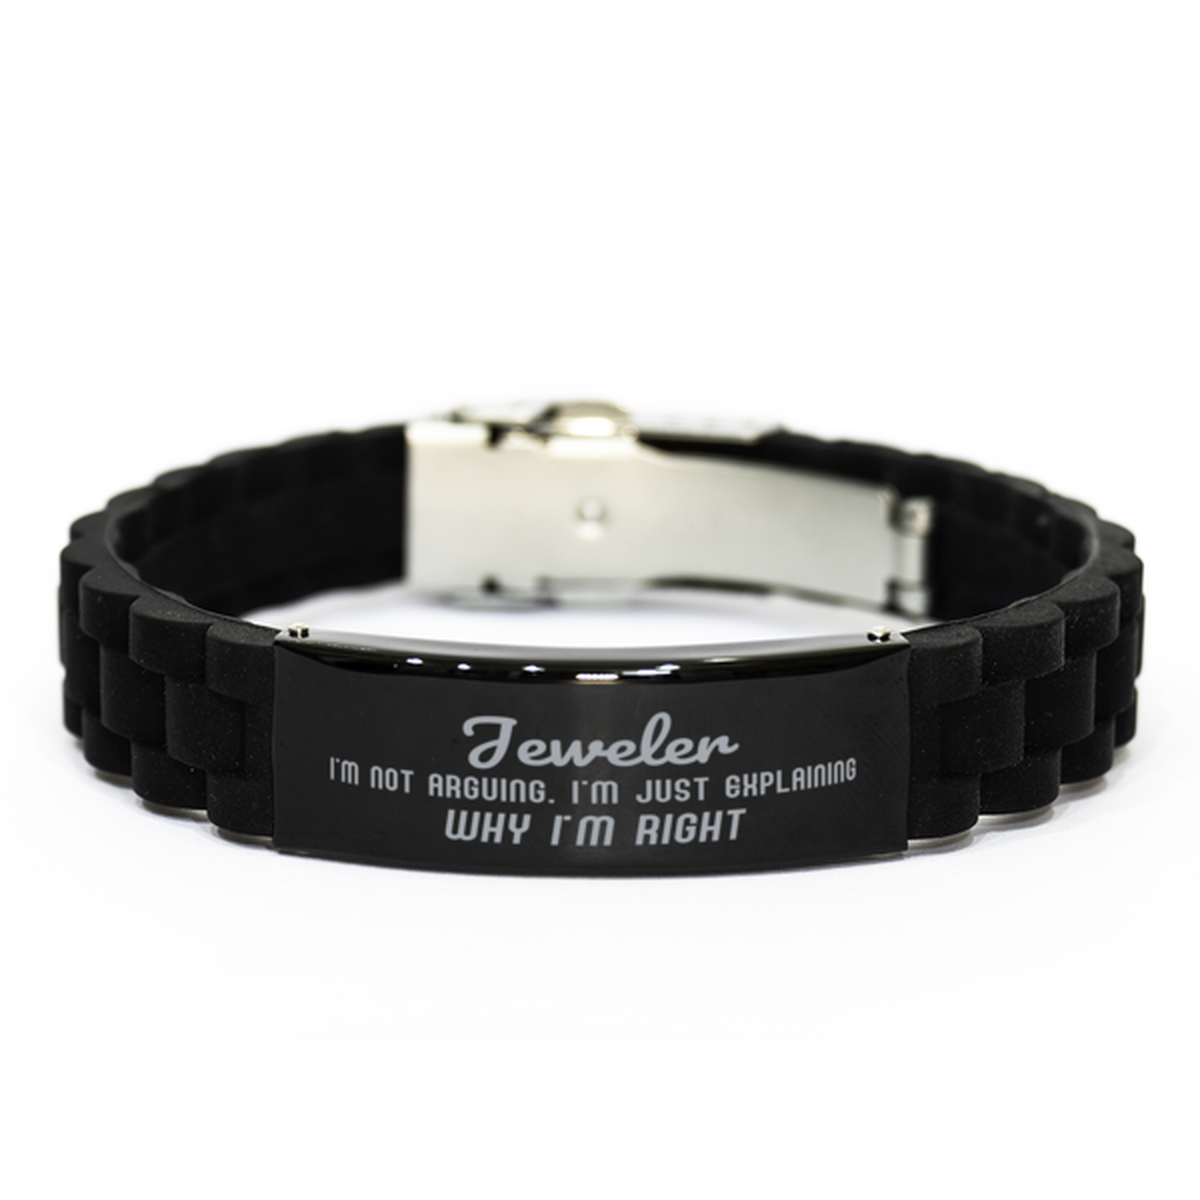 Jeweler I'm not Arguing. I'm Just Explaining Why I'm RIGHT Black Glidelock Clasp Bracelet, Funny Saying Quote Jeweler Gifts For Jeweler Graduation Birthday Christmas Gifts for Men Women Coworker